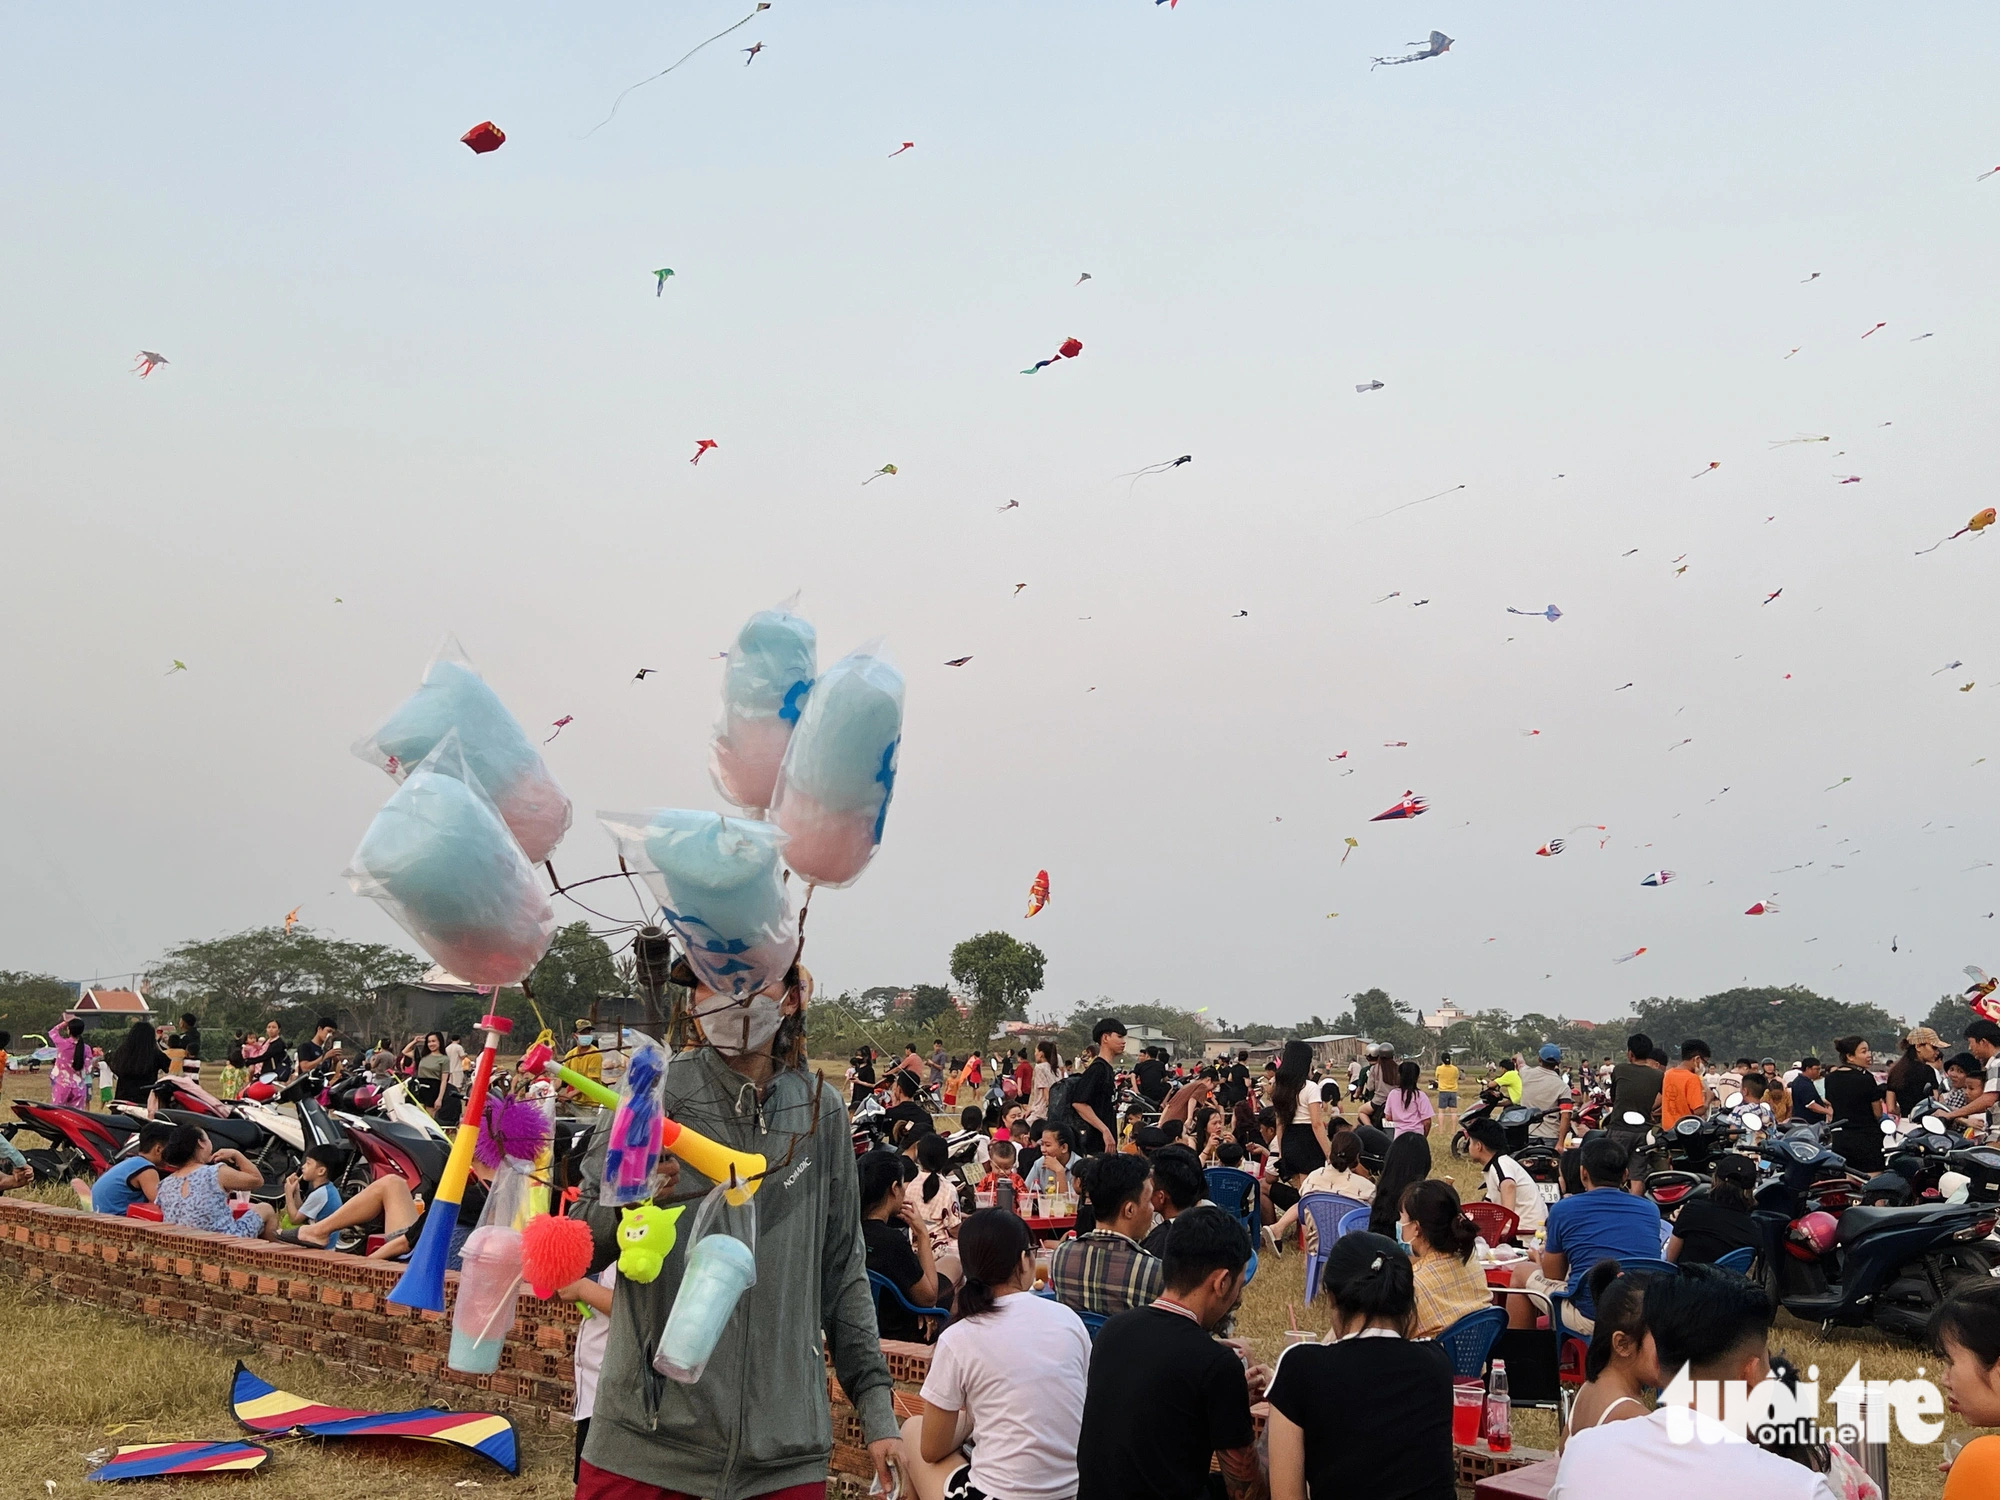 Ho Chi Minh City’s suburban field attracts kite flyers on weekends